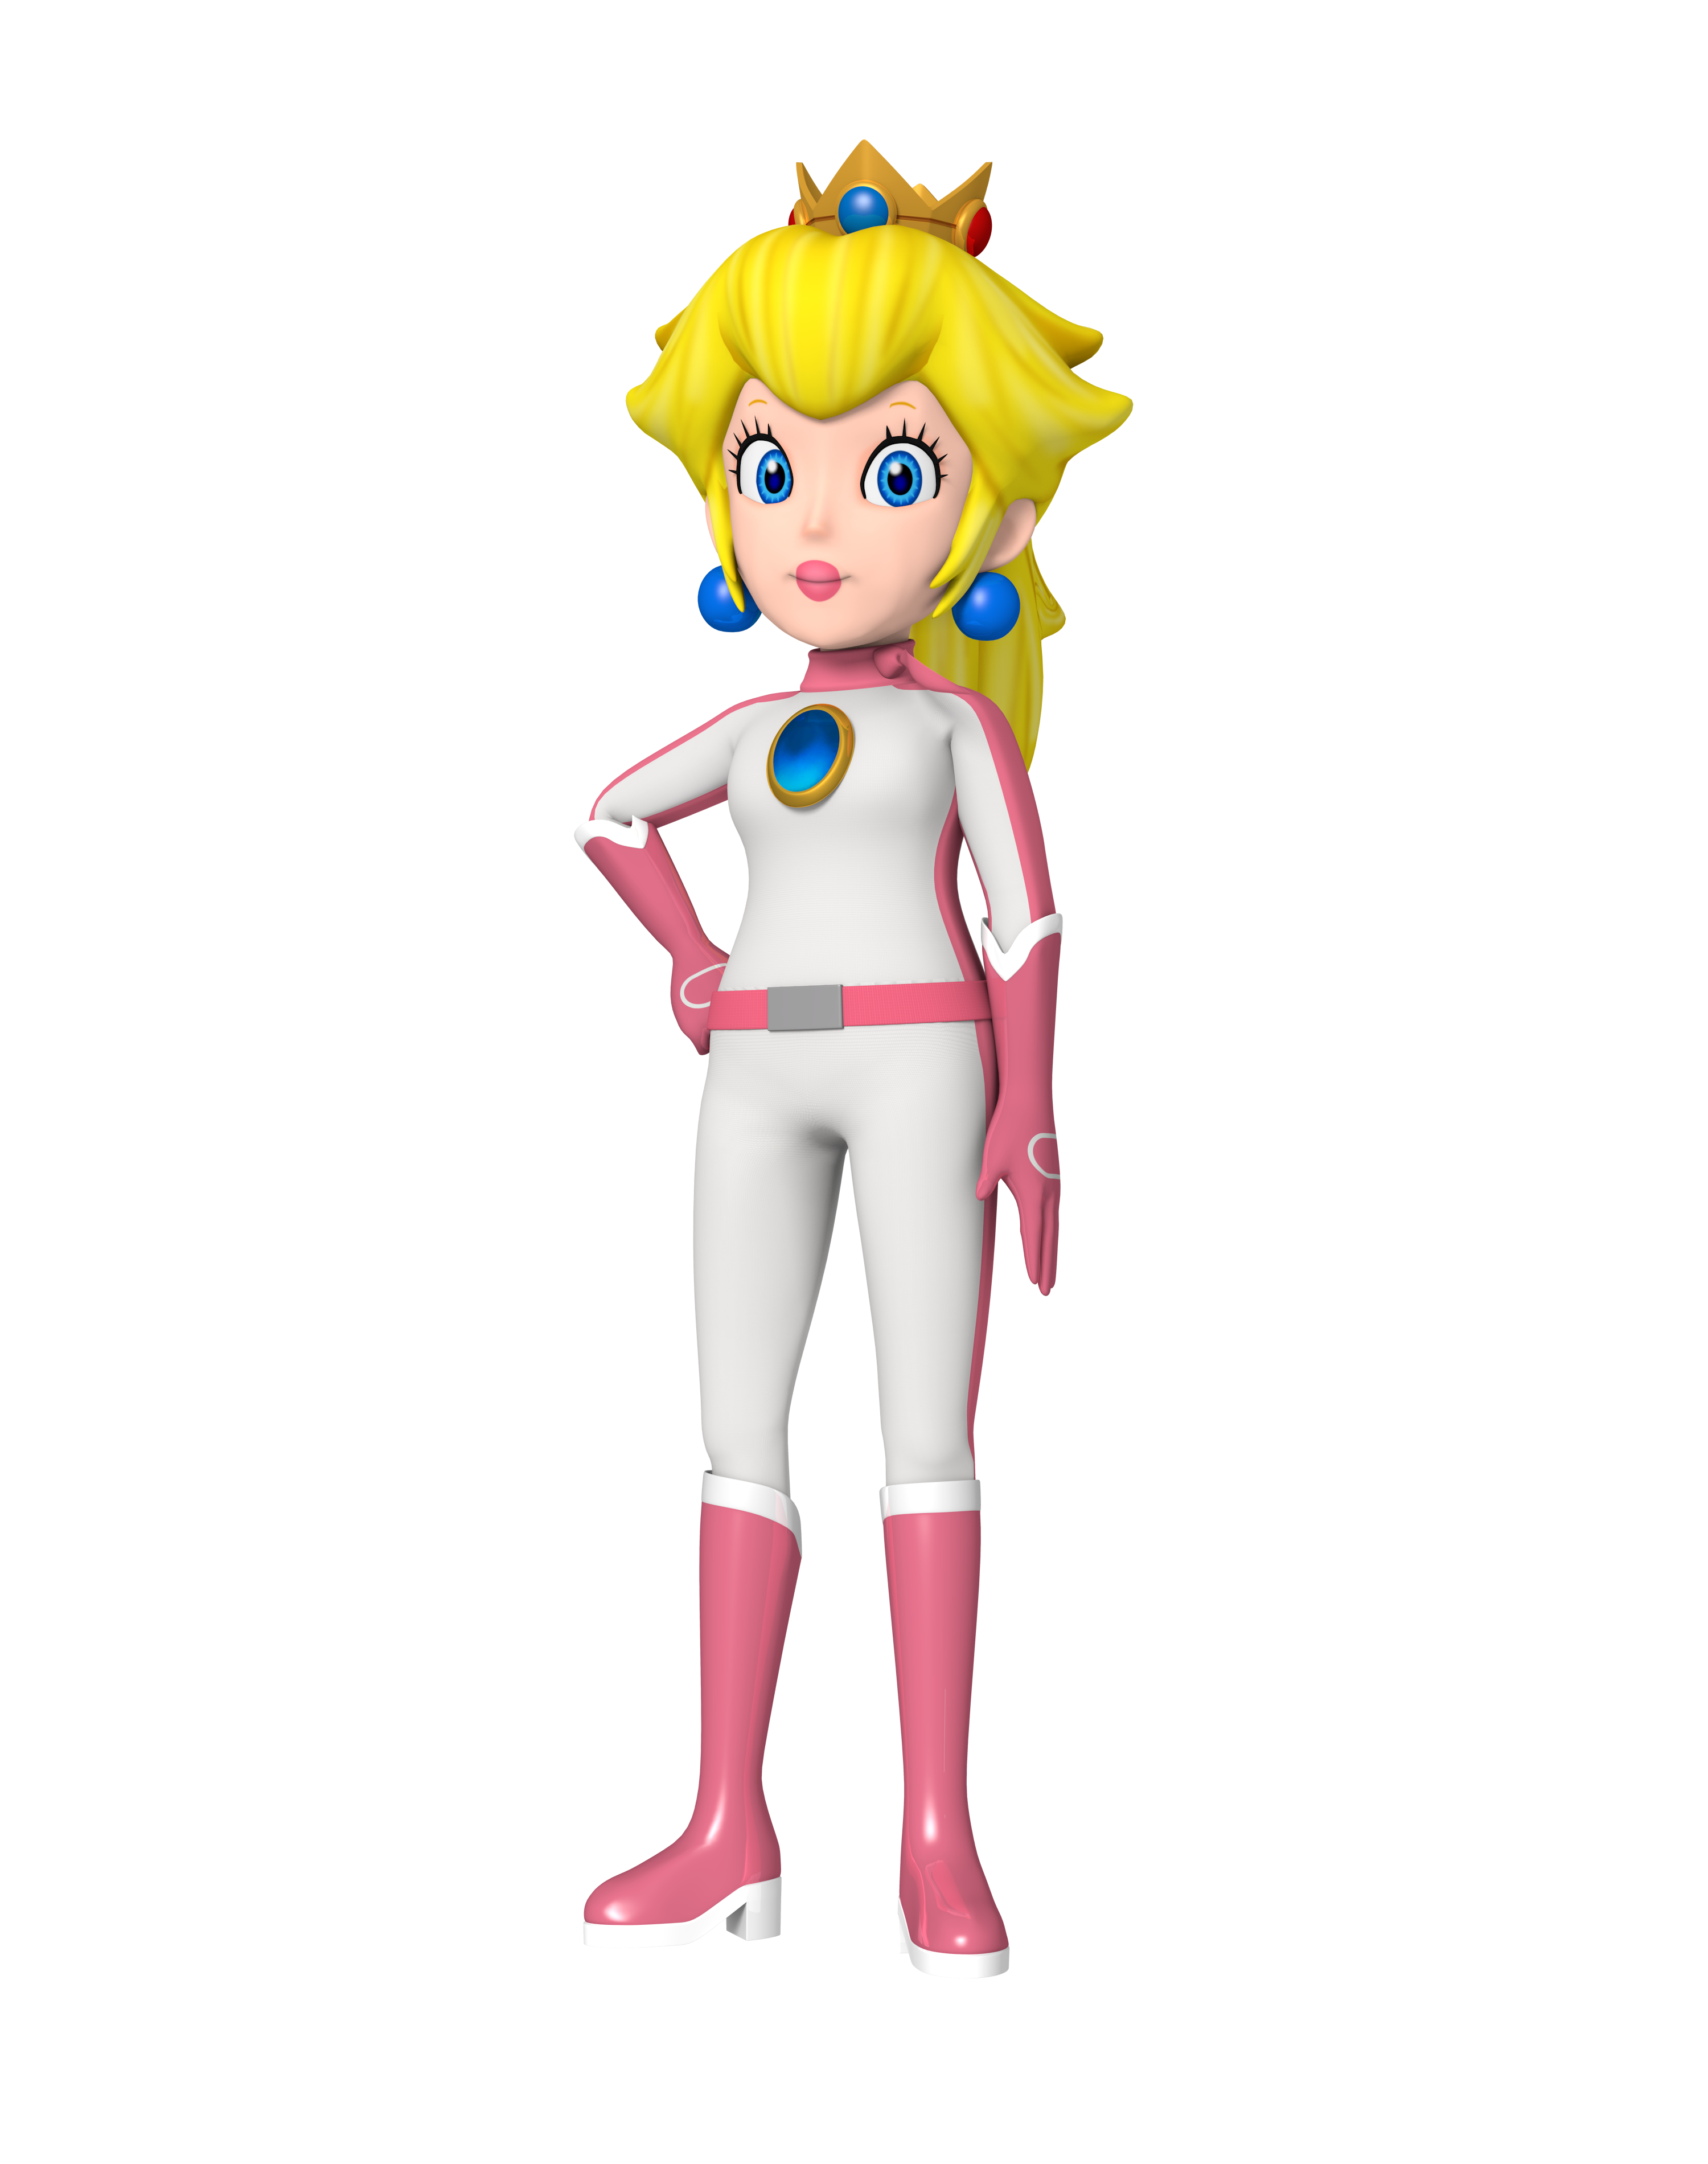 Princess Peach (motorbike outfit) 3D Render by TPPercival on DeviantArt